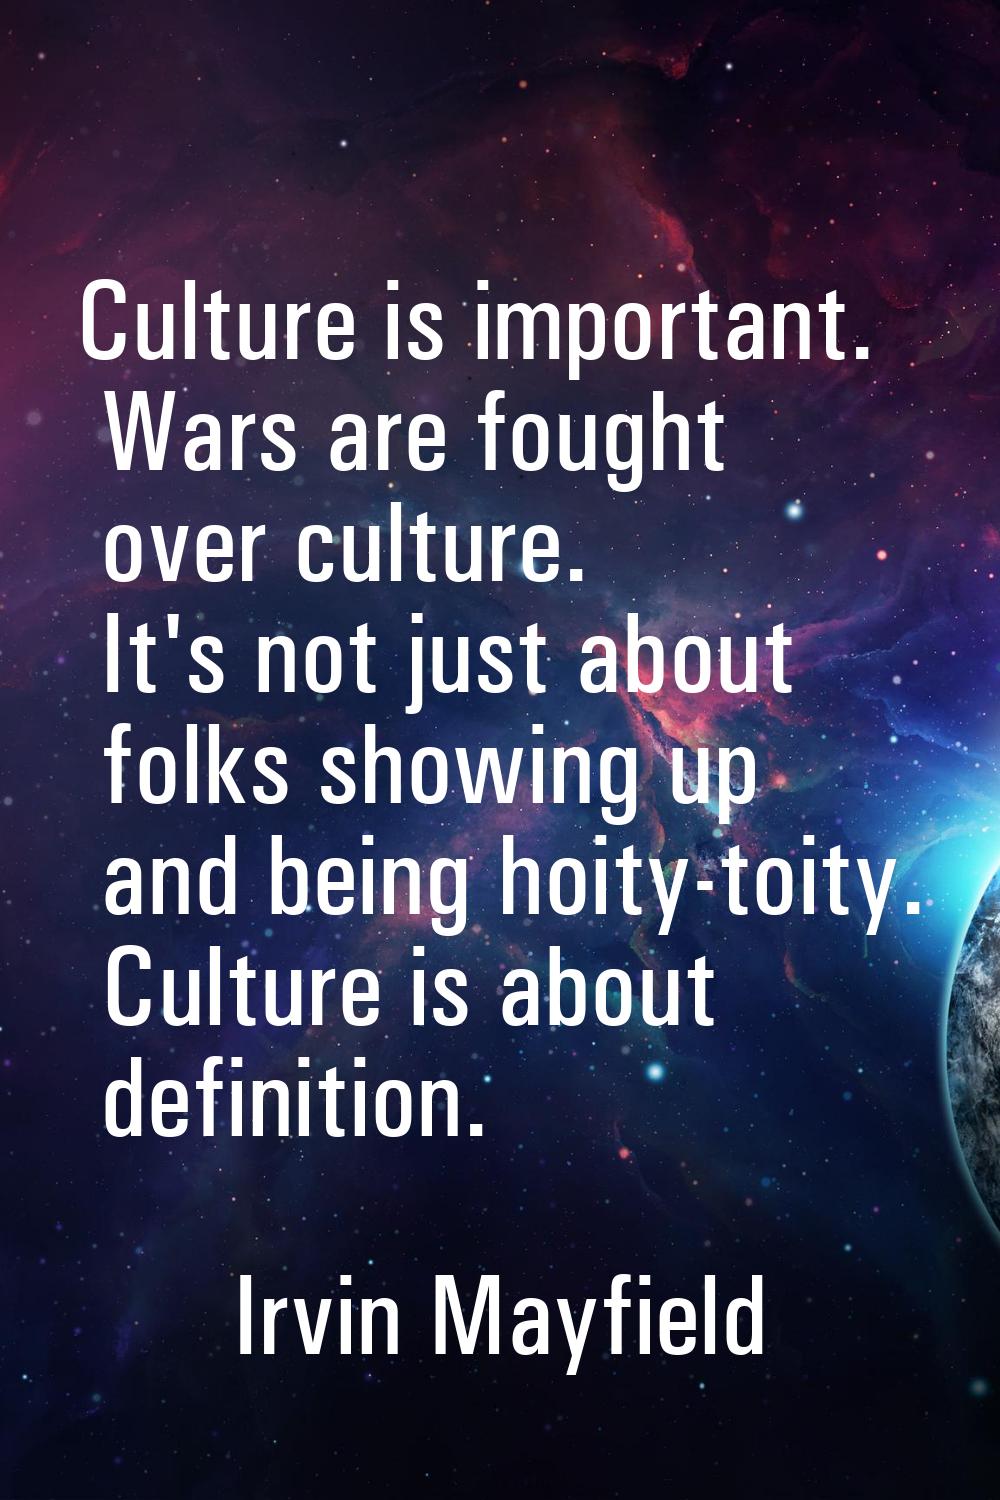 Culture is important. Wars are fought over culture. It's not just about folks showing up and being 